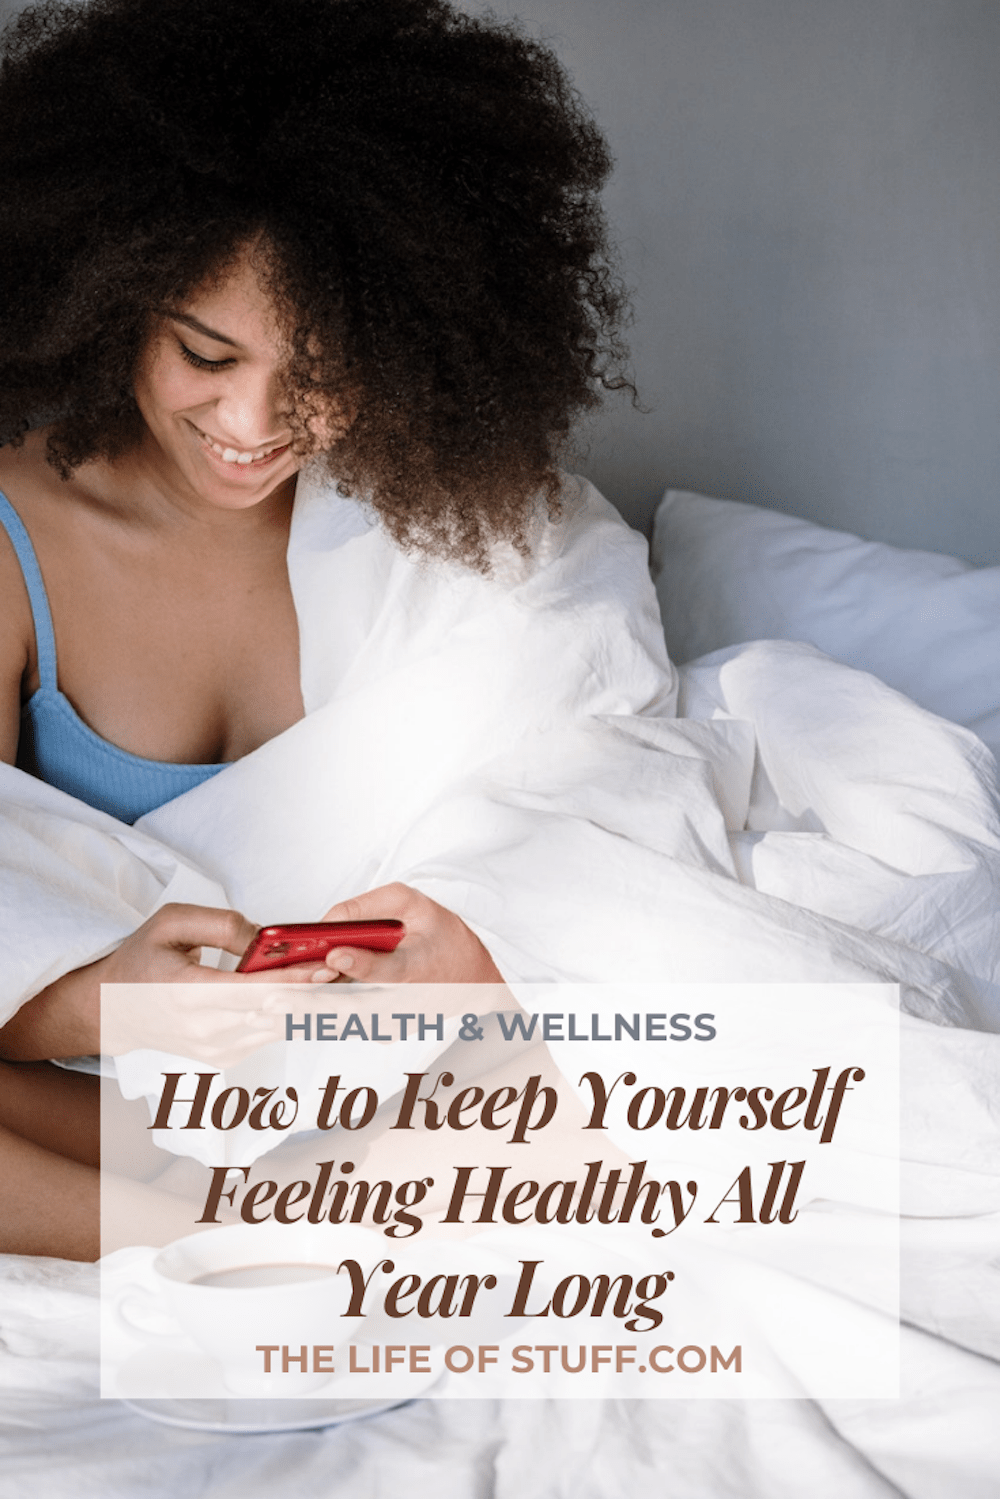 How to Keep Yourself Feeling Healthy All Year Long - The Life of Stuff